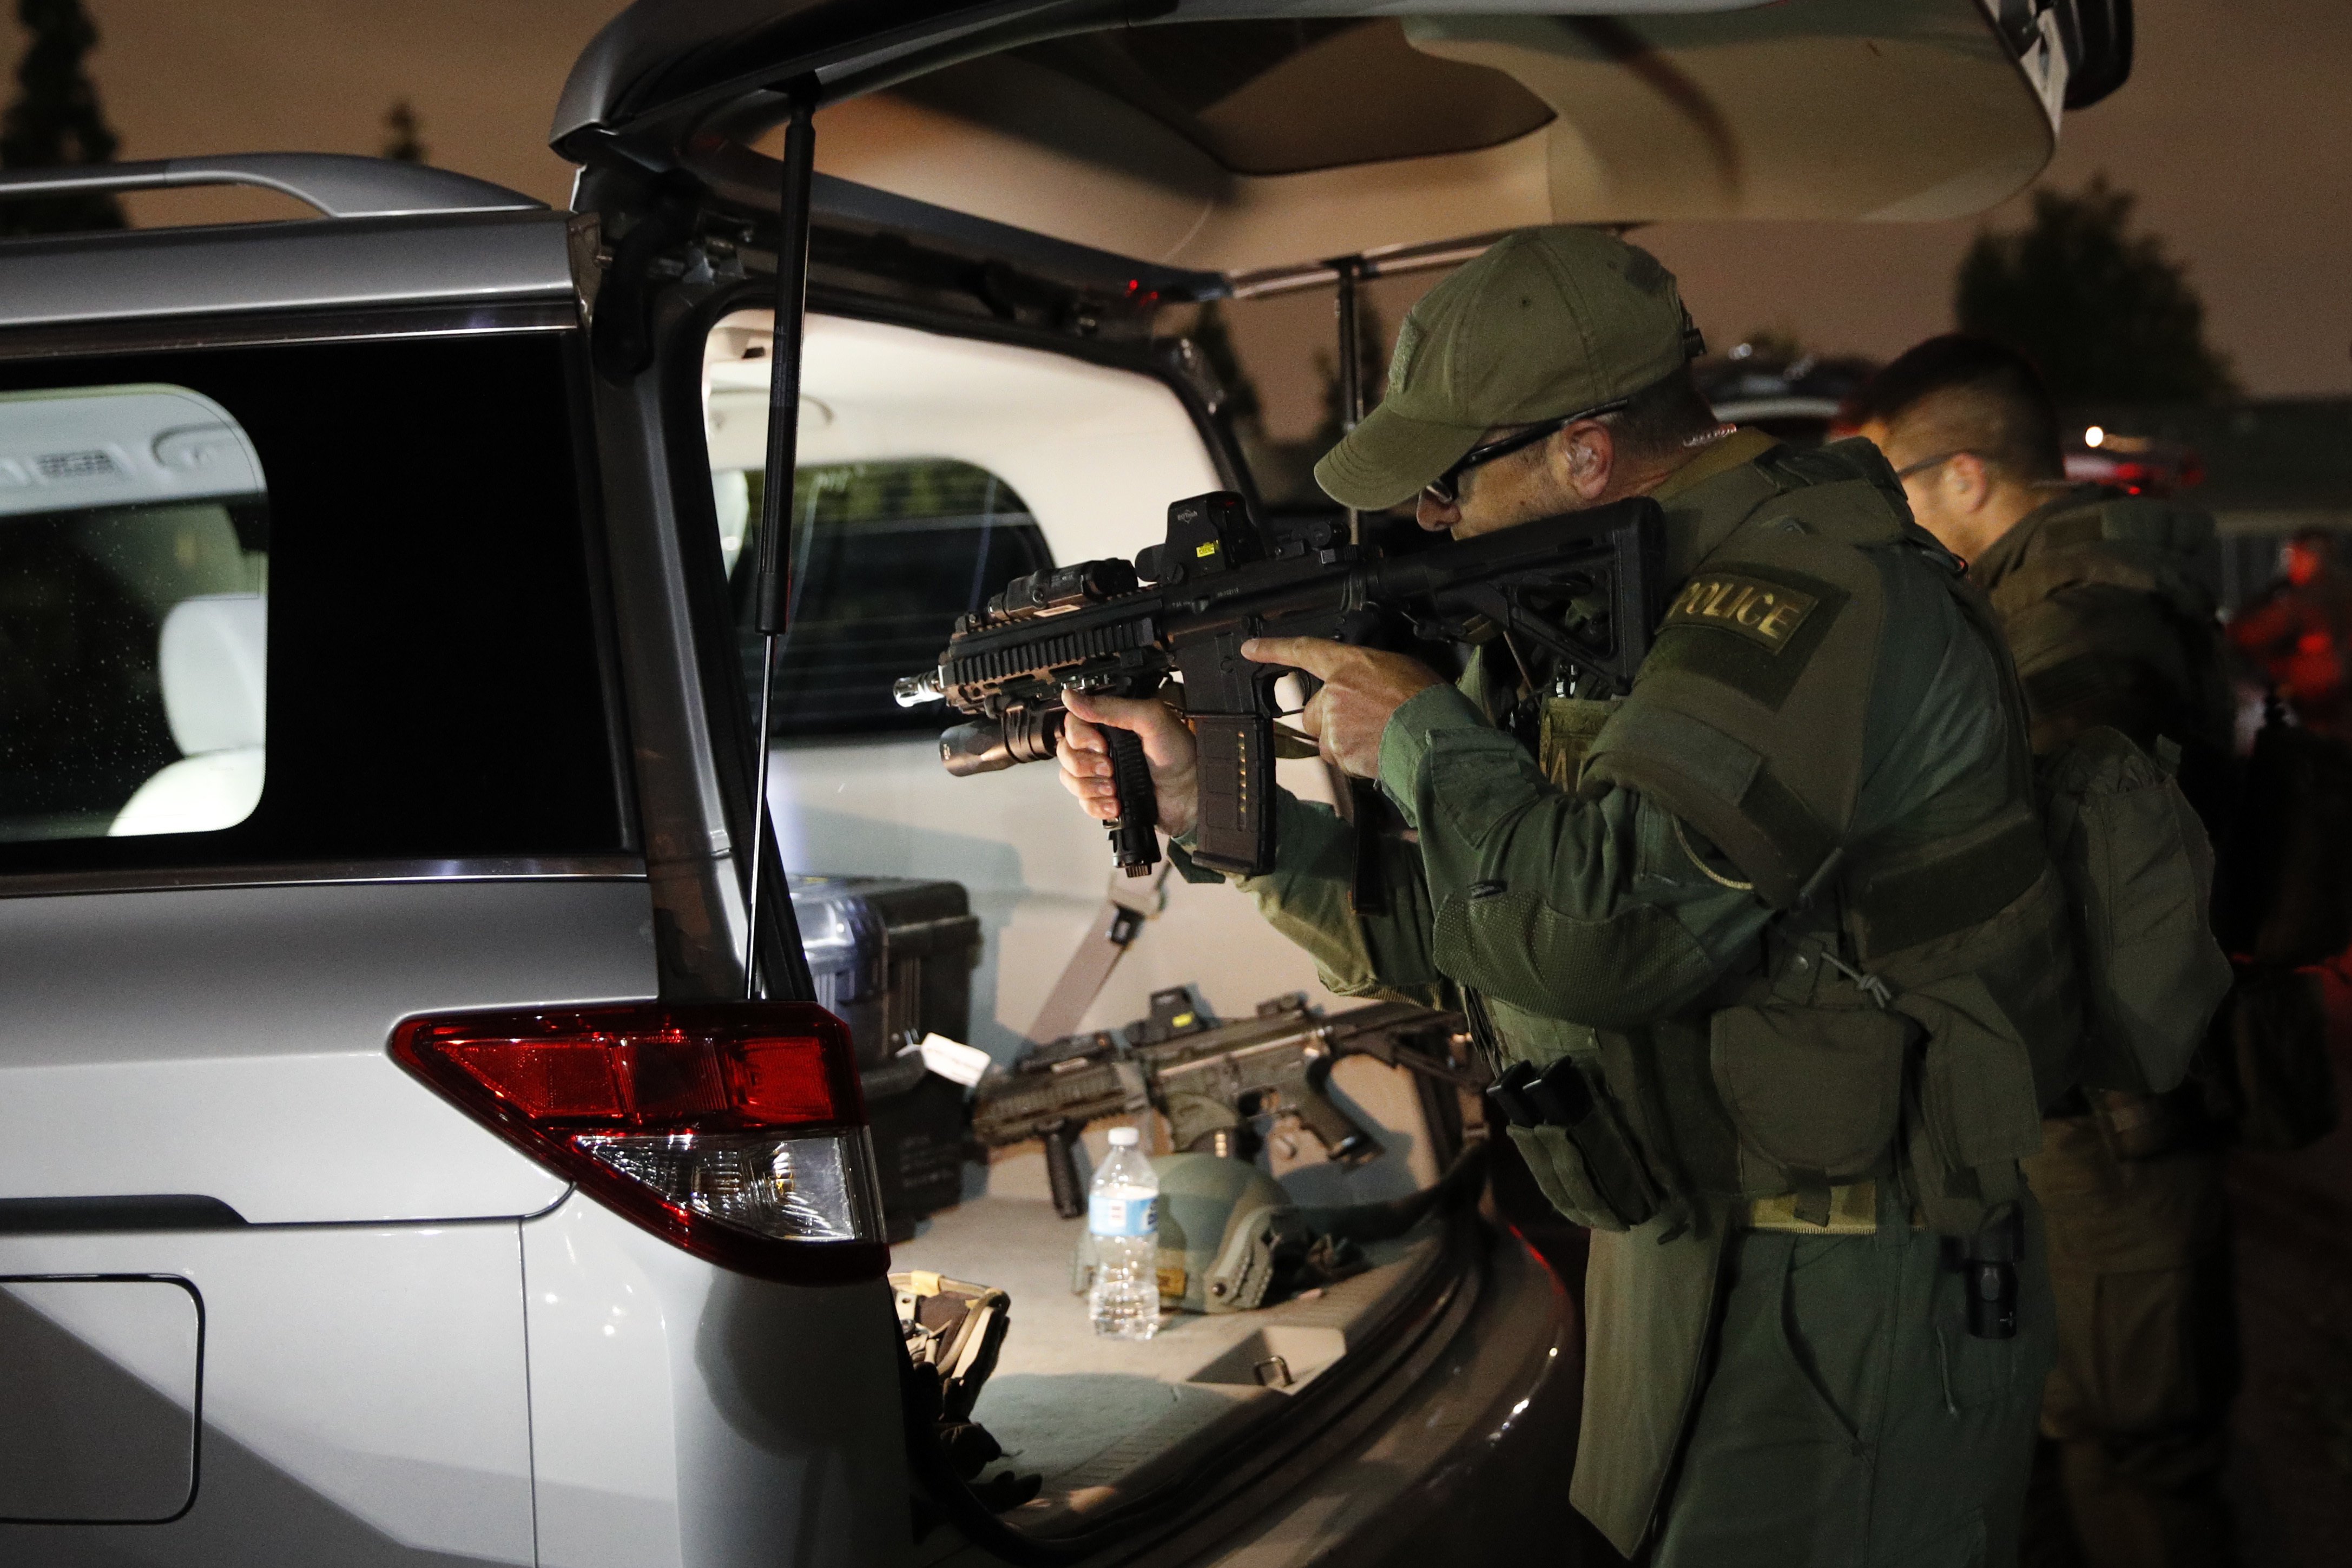 An ATF agent checks his weapon as he gets ready for a raid on May 17, 2017, in Los Angeles. Hundreds of federal and local law enforcement fanned out across Los Angeles, serving arrest and search warrants as part of a three-year investigation into the violent and brutal street gang MS-13. (Jae C. Hong&mdash;AP)